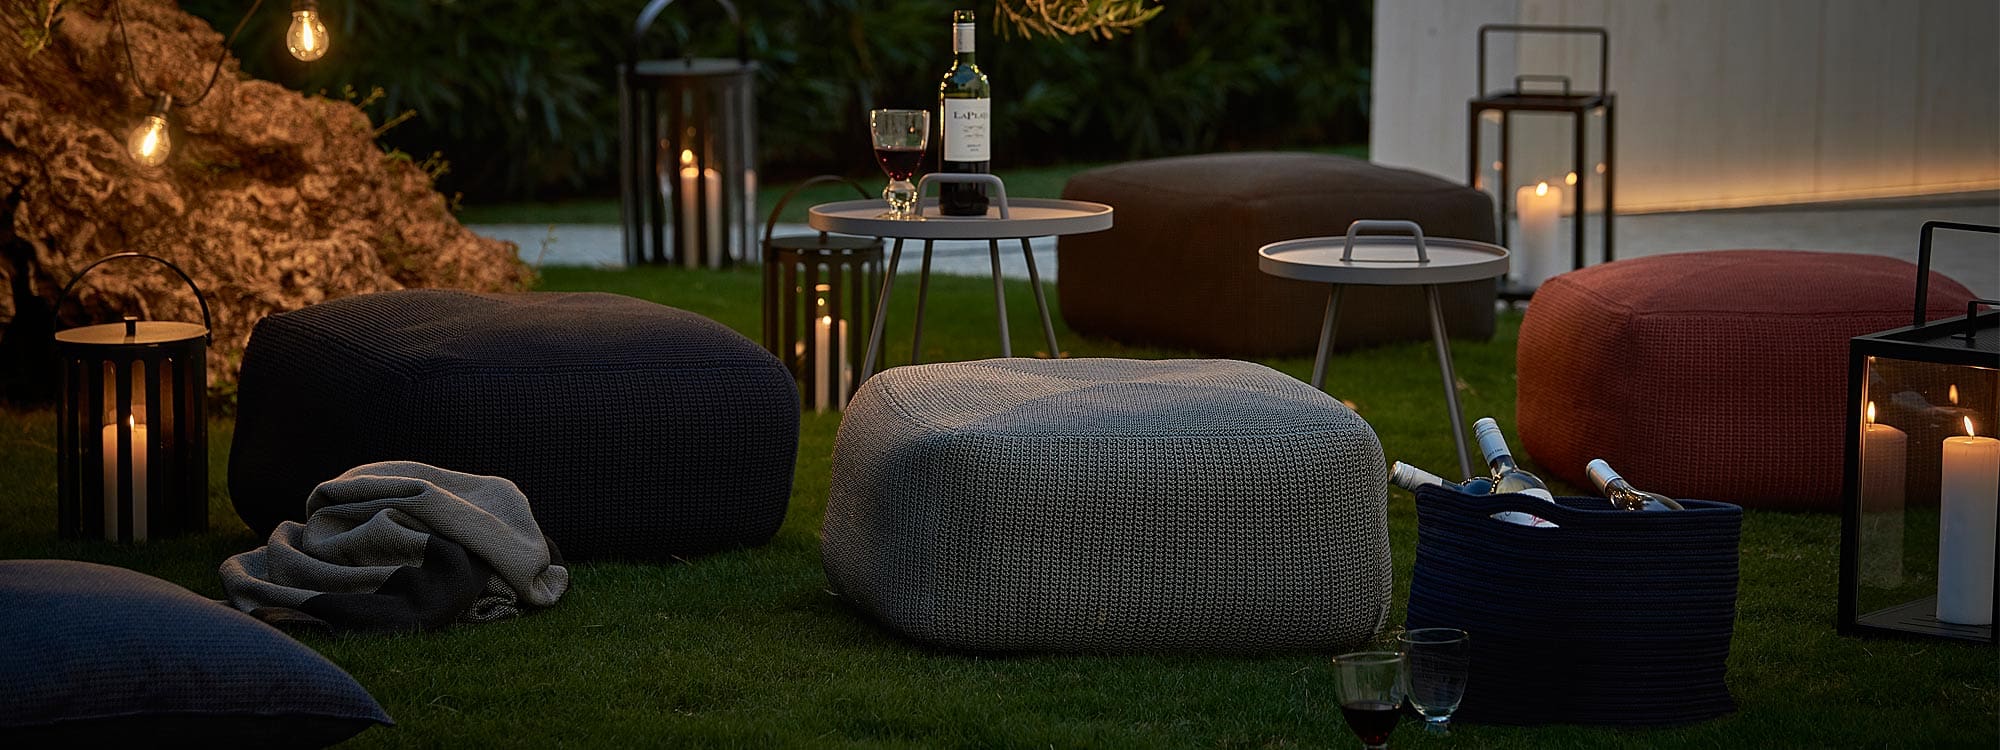 Nighttime image of Cane-line Divine crocheted garden poufs together with On The Move outdoor tray tables and Lighthouse lanterns